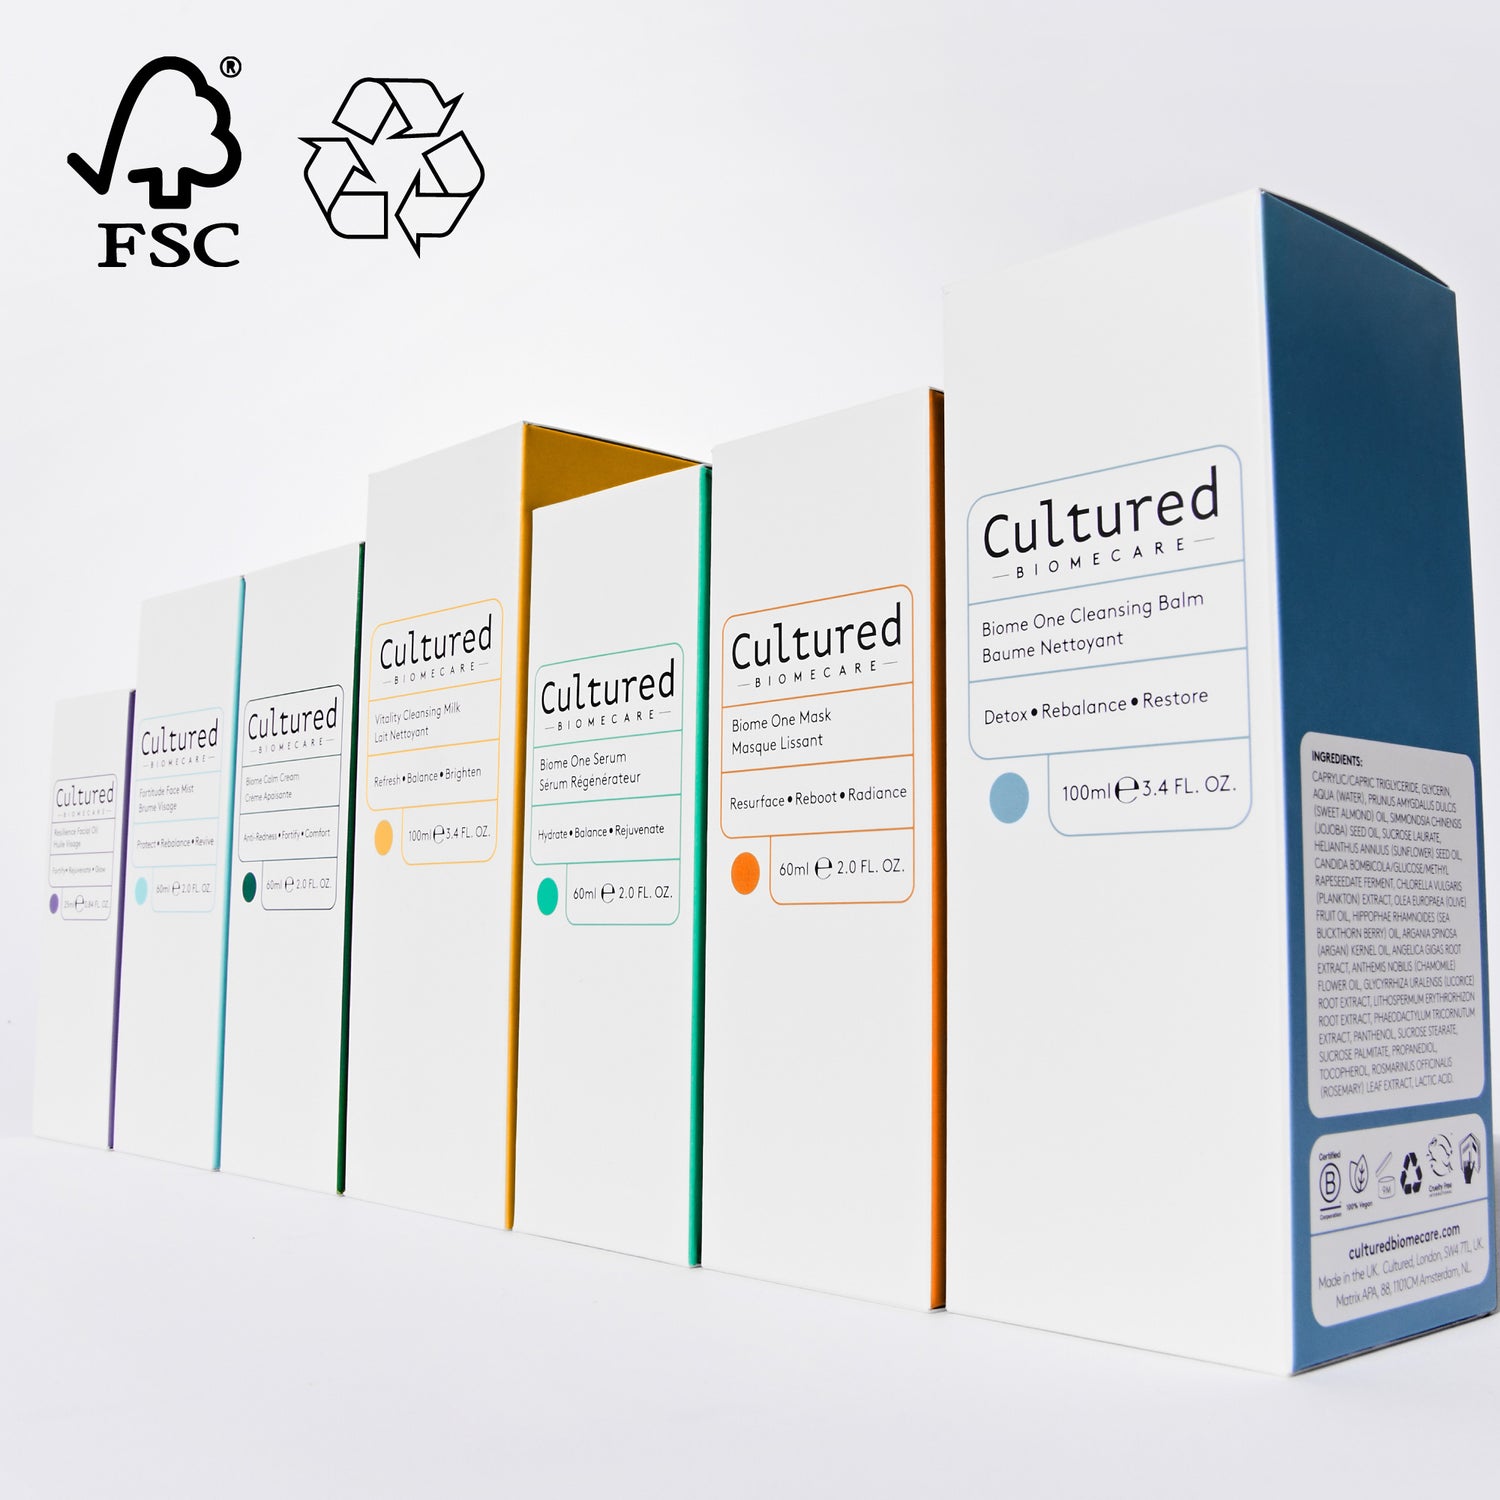 The culture biomecare products in their white packaging in a row. Each one has a different colour on its two sides.